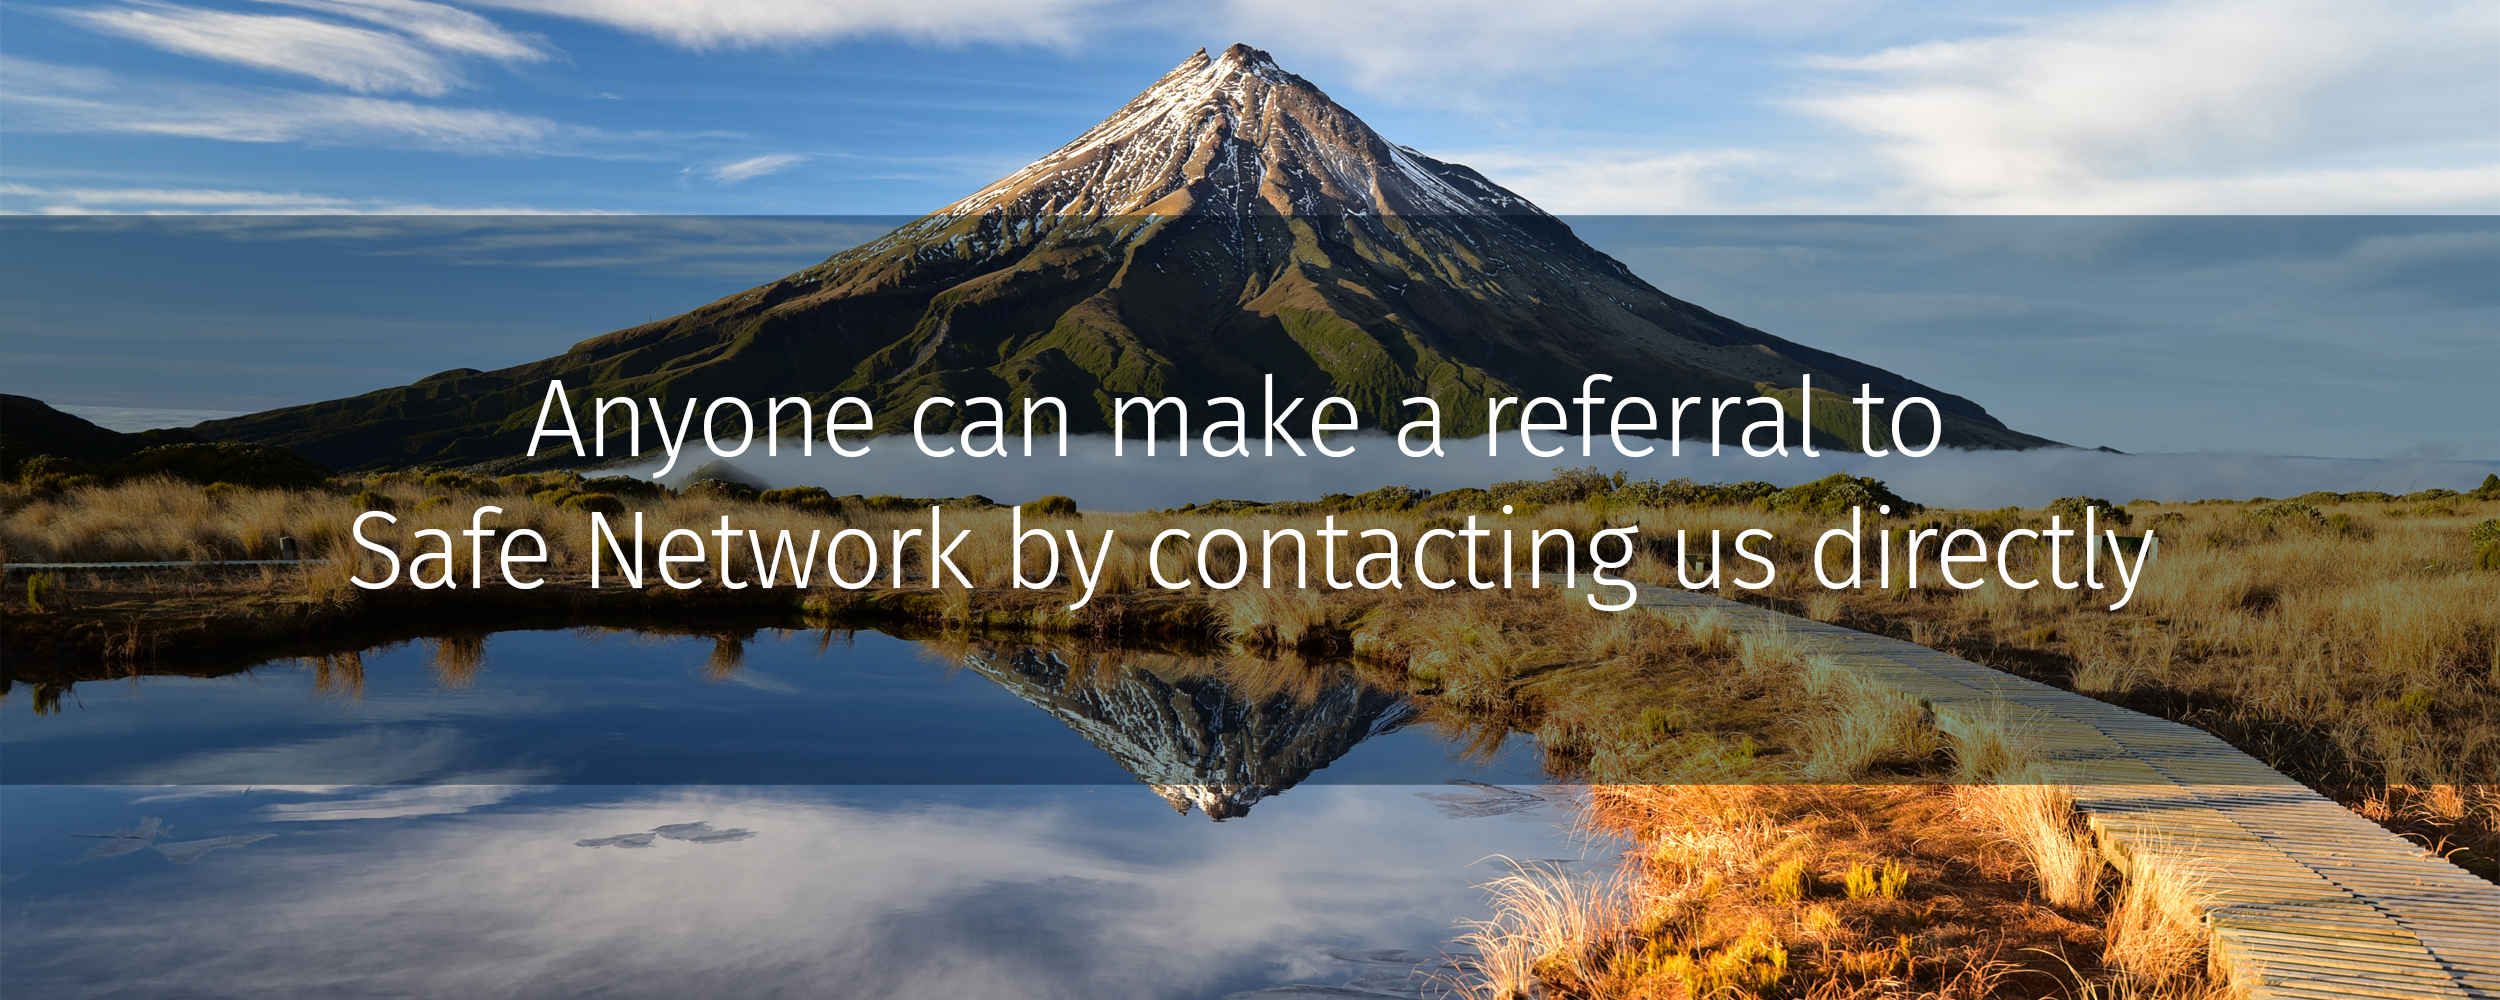 anyone can make a referral to Safe Network by contacting us directly